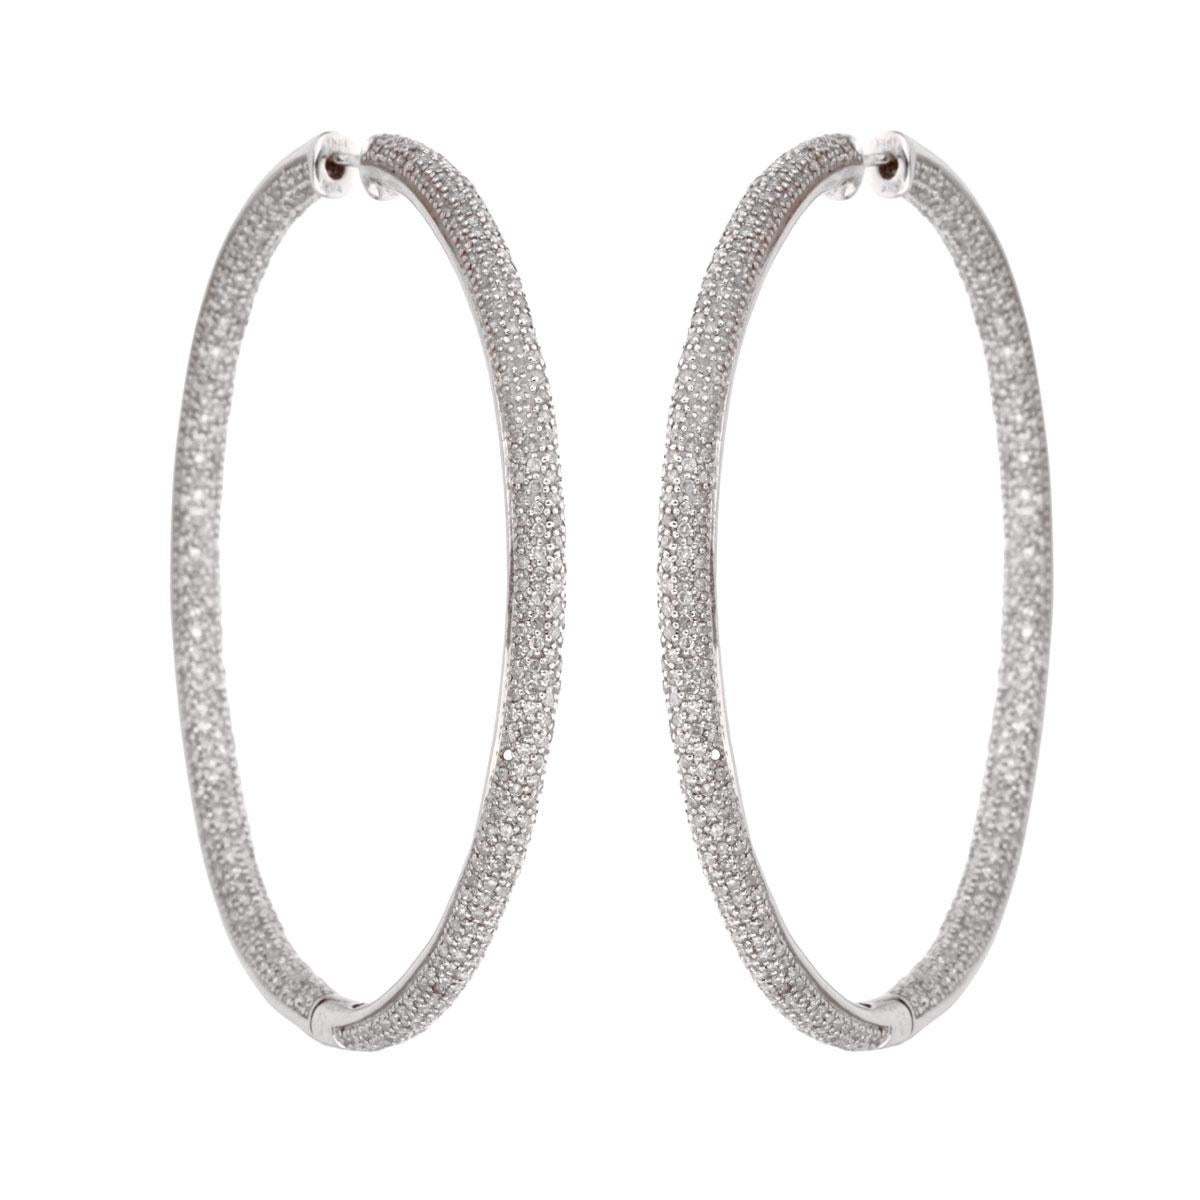 A fabulous set of chic diamond hoop earrings with appx 7ct of round brilliant cut diamonds set in 14k white gold. The earrings have a diameter of 2.5